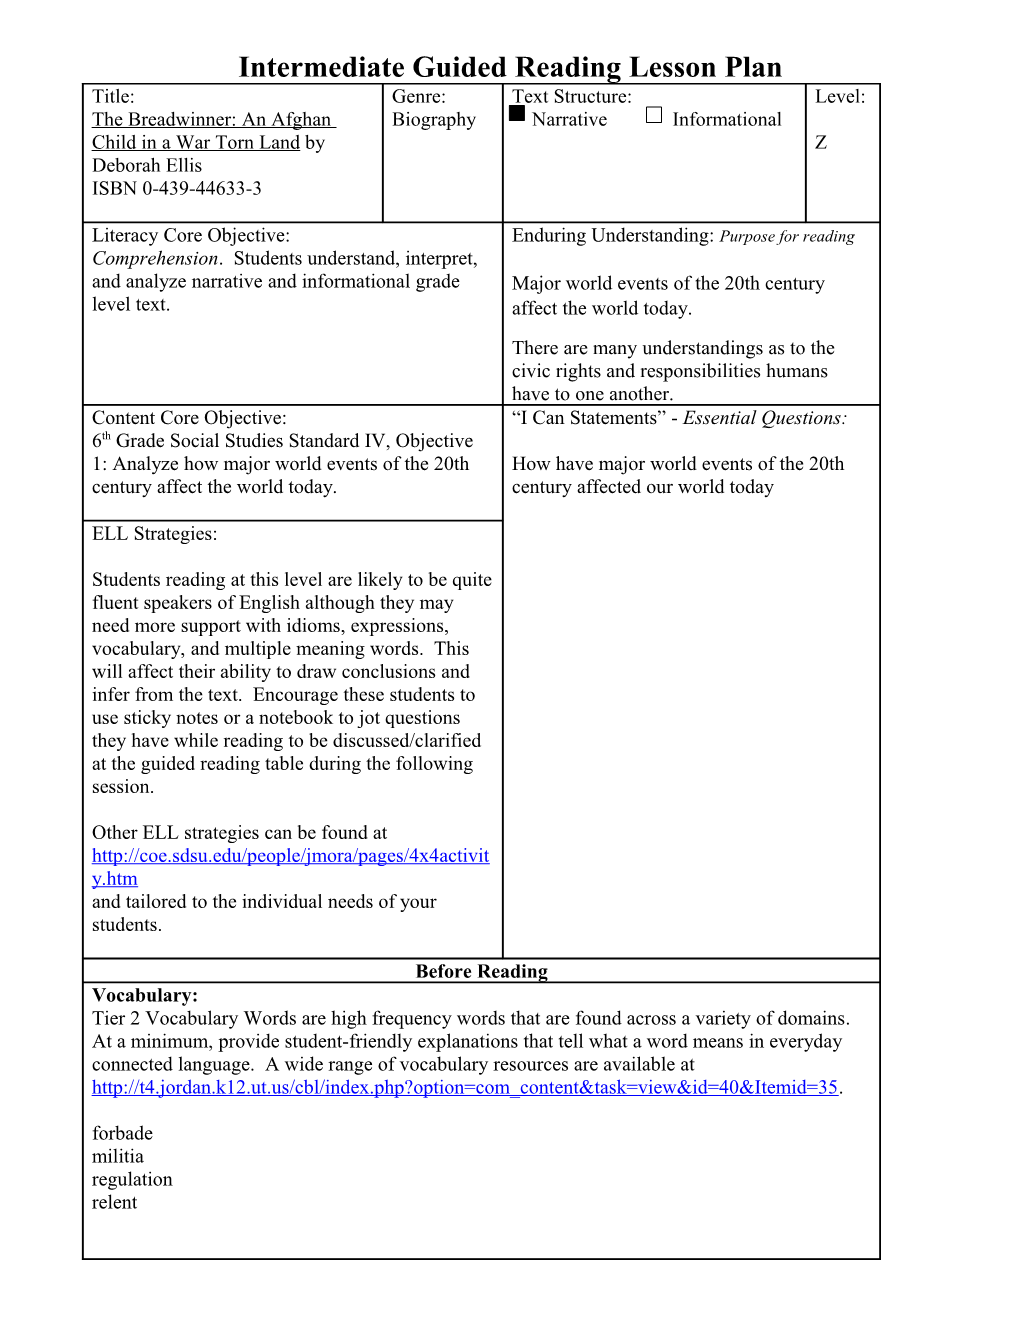 Primary Guided Reading Lesson Plan s9